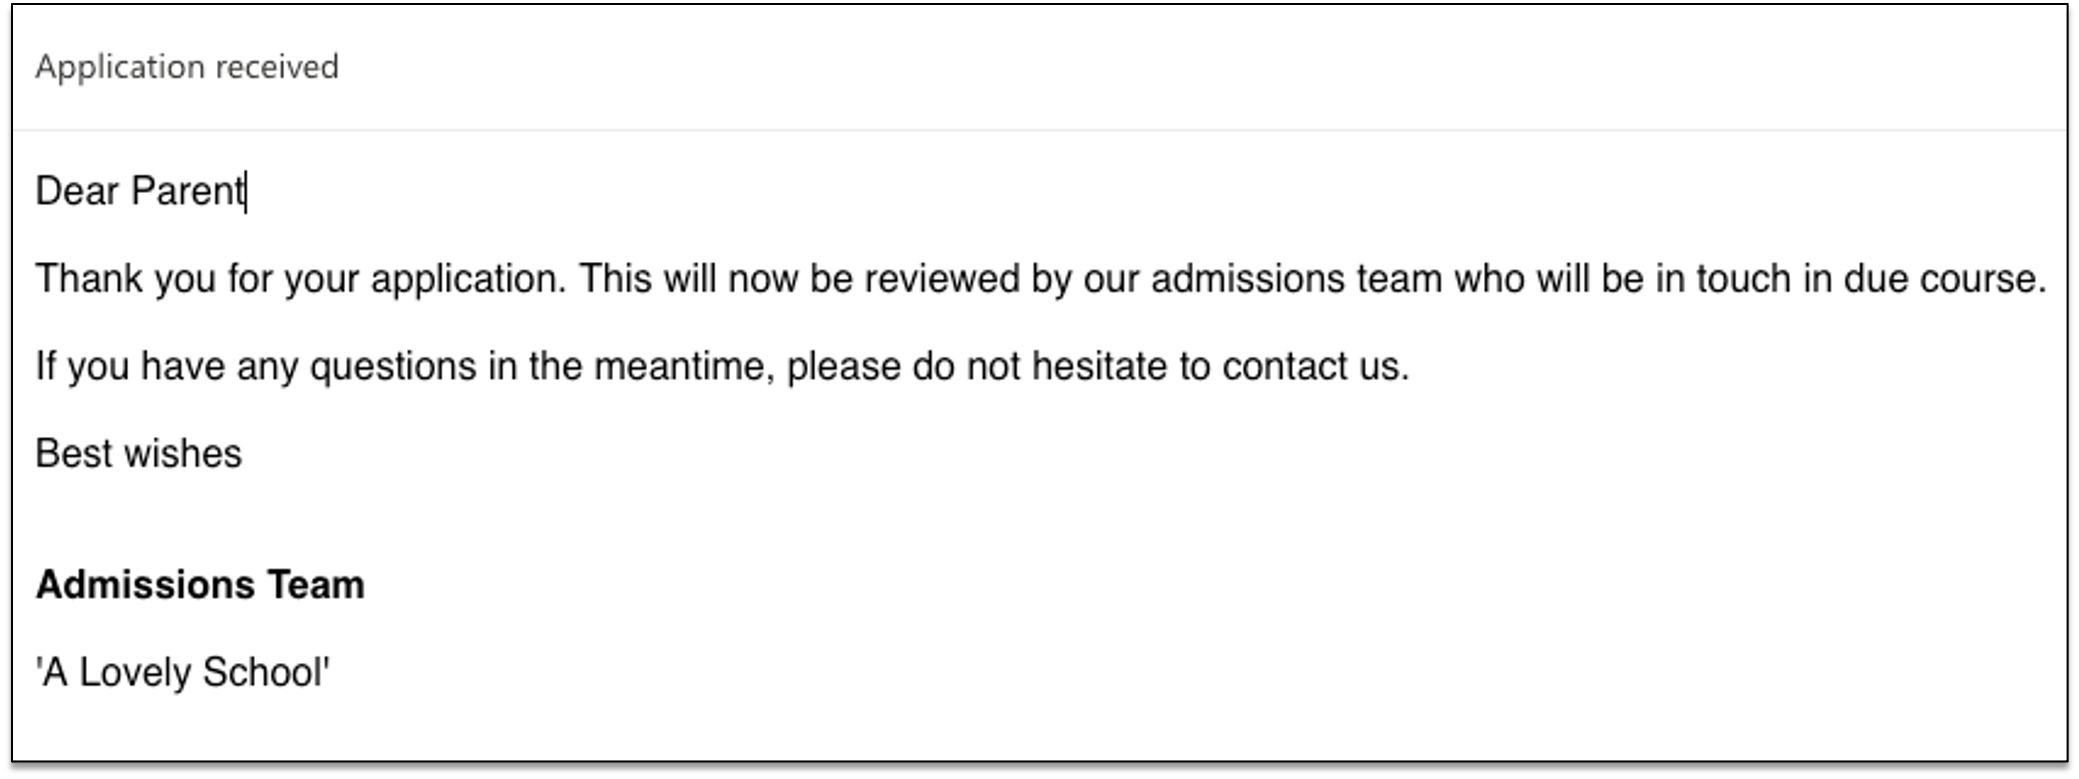 Bad example of an admissions email